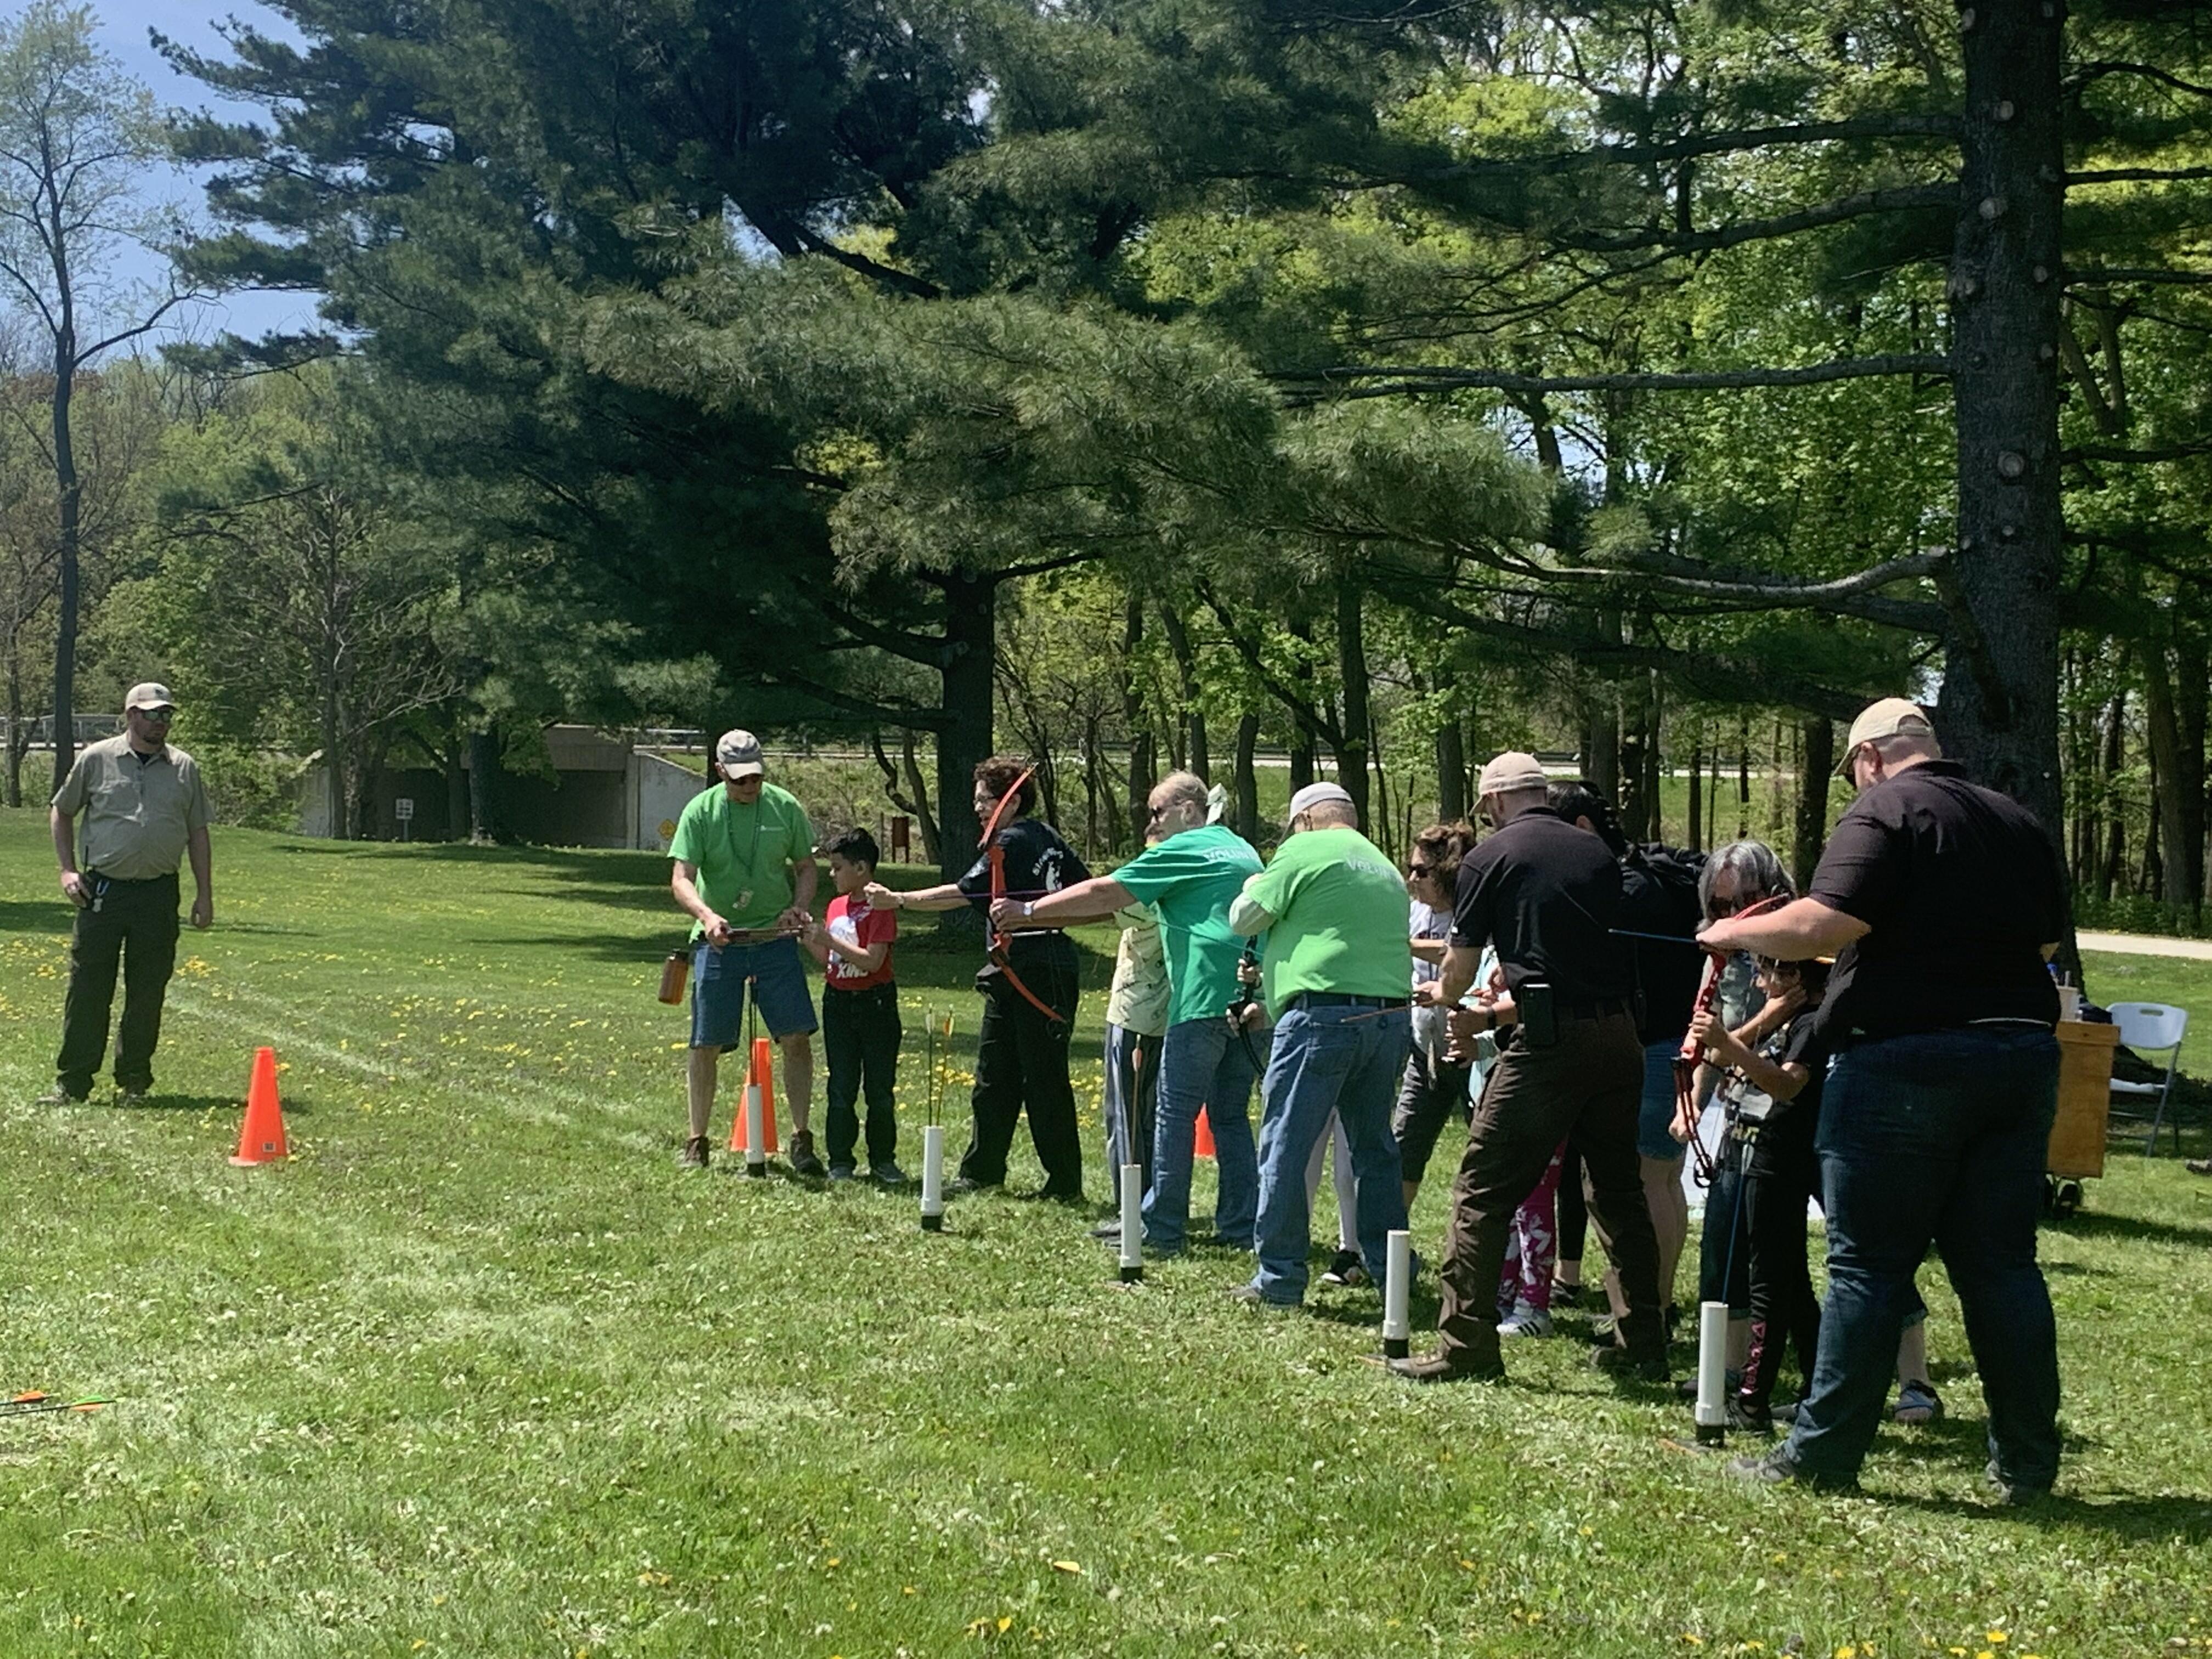 Students learning archery